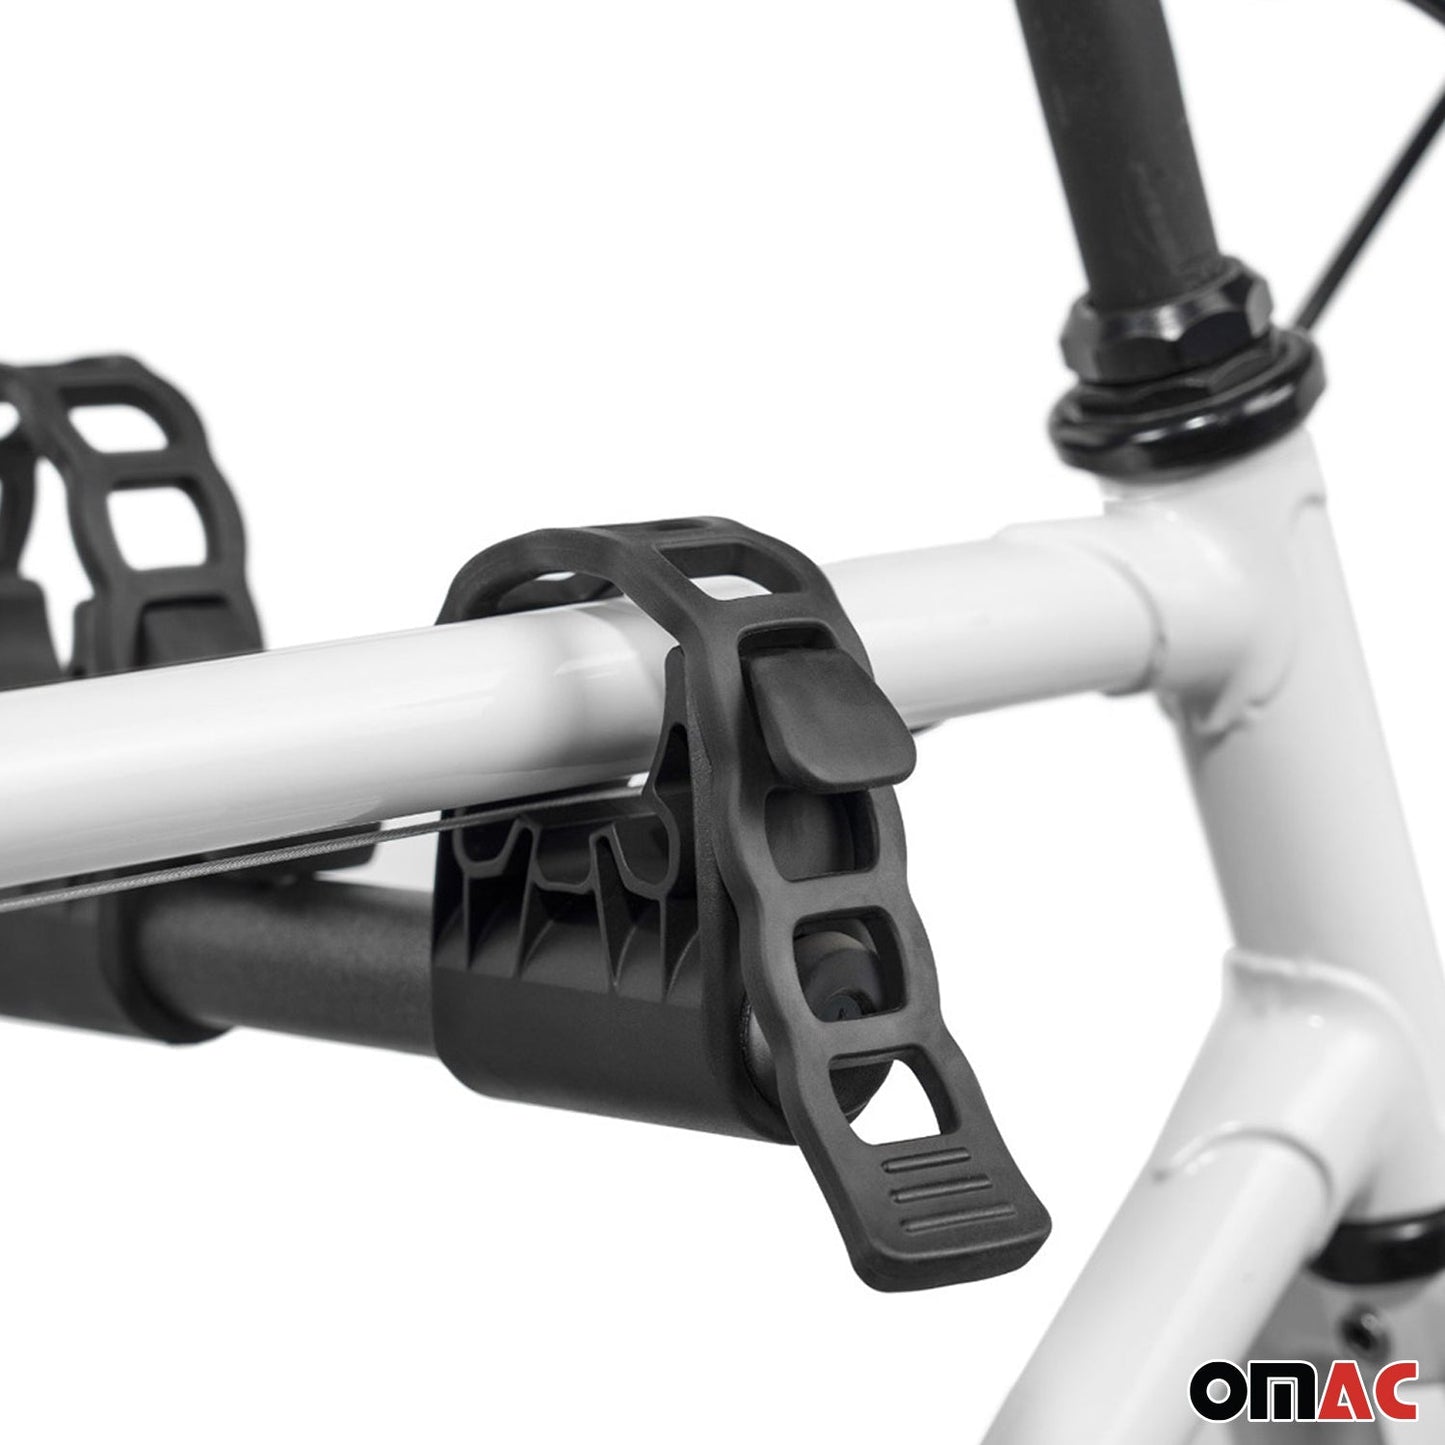 OMAC 3 Bike Rack For BMW Series 3 E46 Touring 1999-2005 Trunk Mount Bicycle Carrier U023842